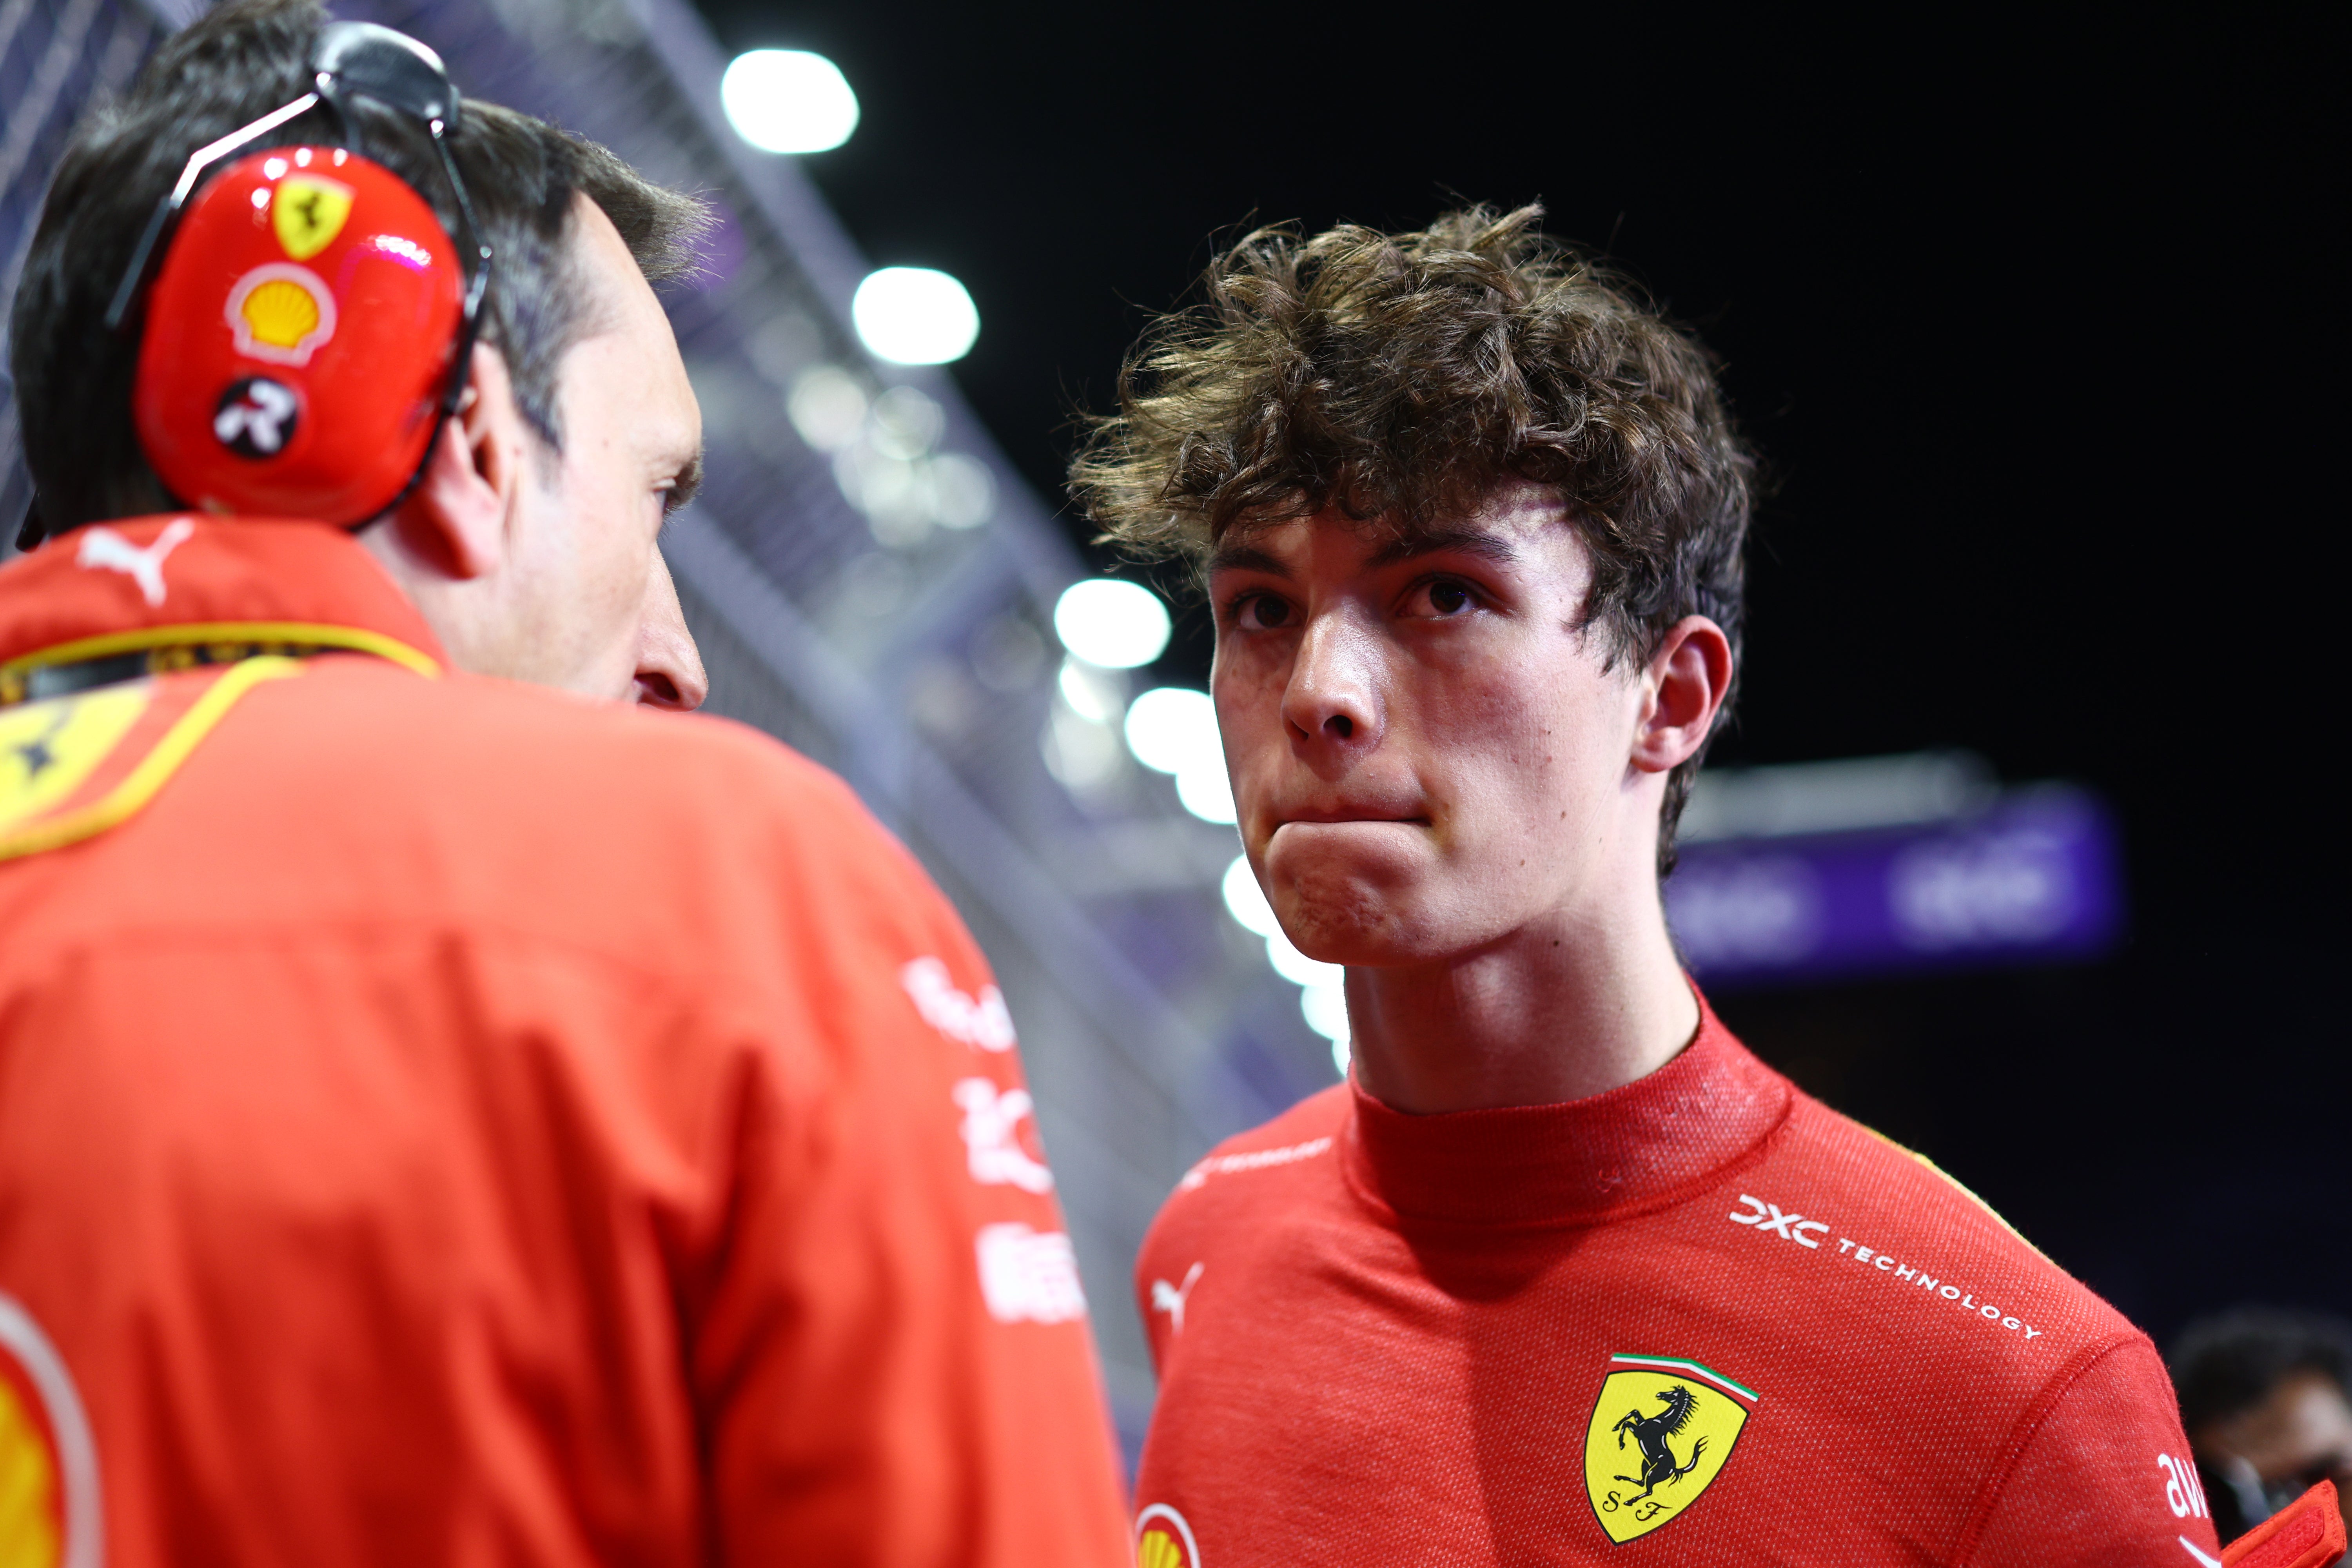 Ollie Bearman drove a brilliant race for Ferrari and finished seventh on debut